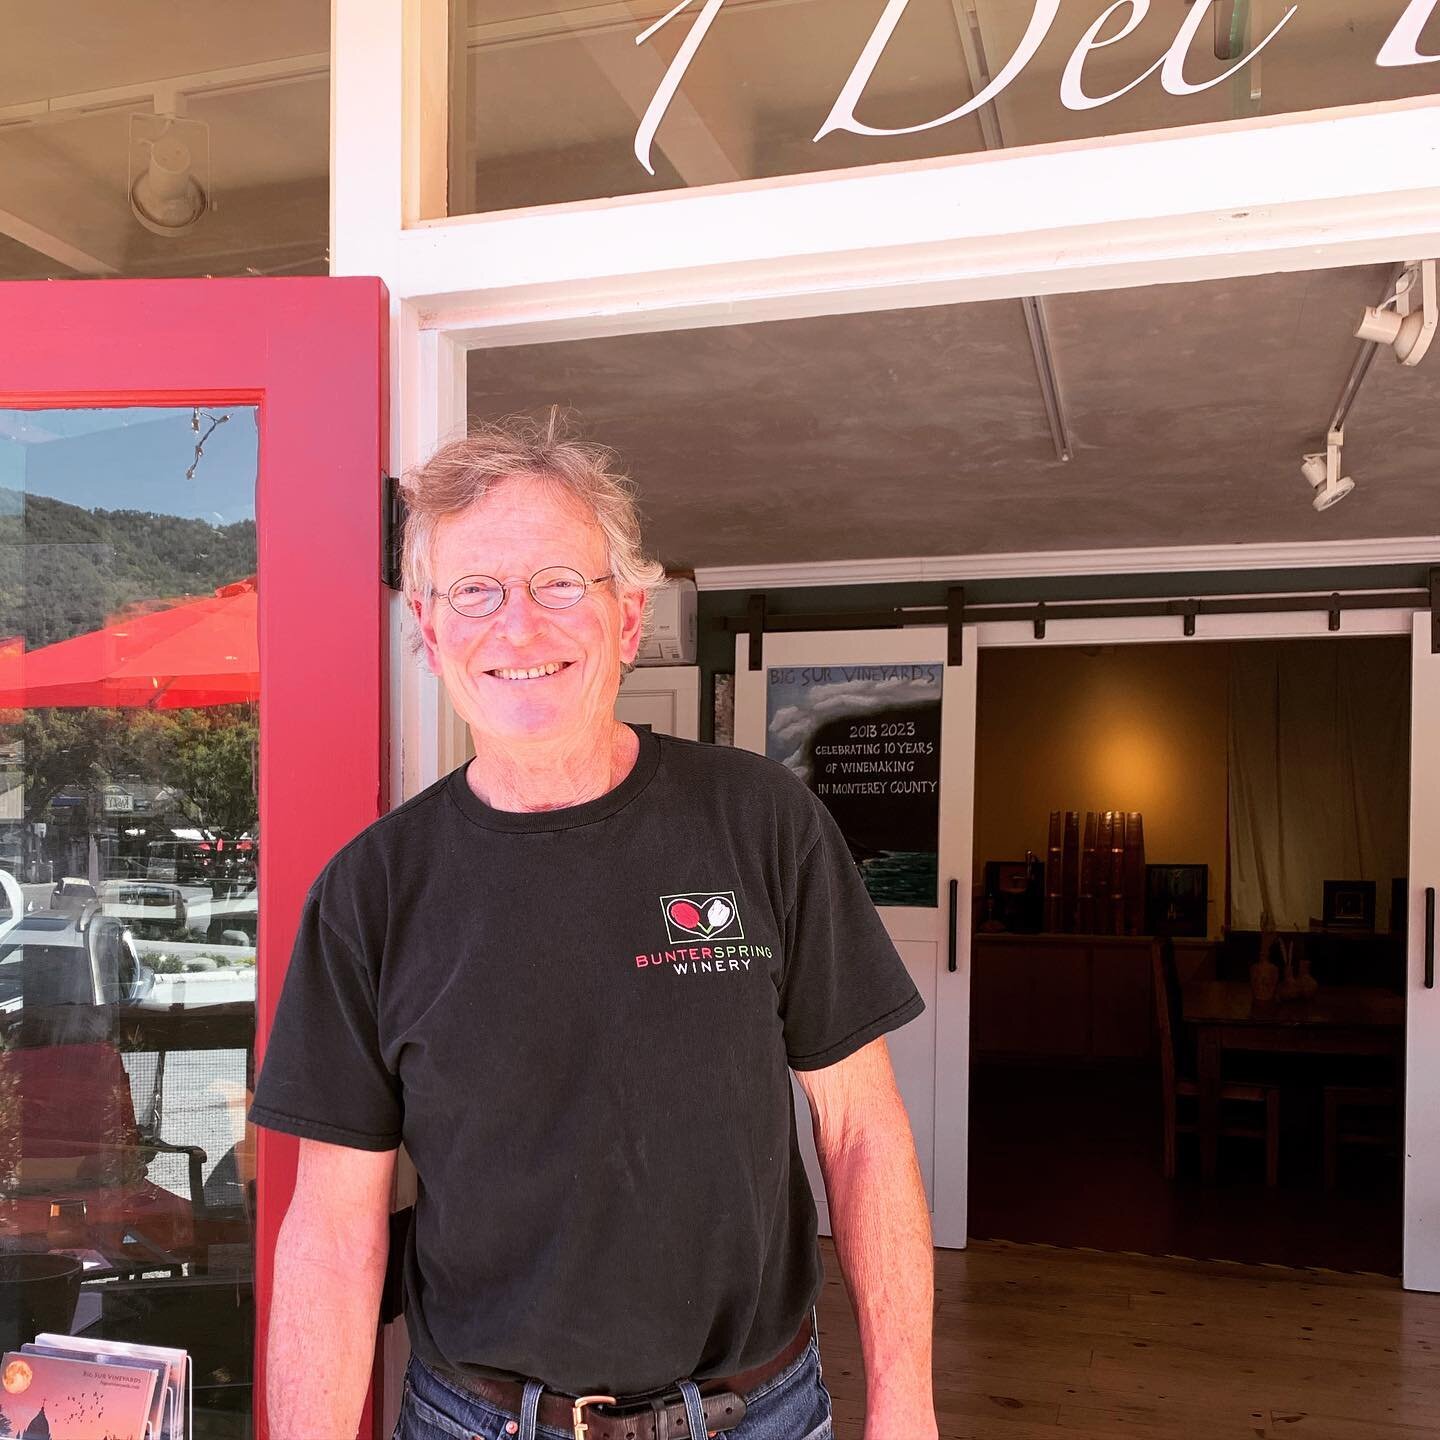 Mark Bunter is guest pouring at our tasting room today! It&rsquo;s a beautiful day in the valley. Stop in and catch up with Mark and taste his sublime 21 Pinot made for us! Open til 5:30&hellip; music tomorrow 3-5! #markbunter #winetasting #pinotnoir